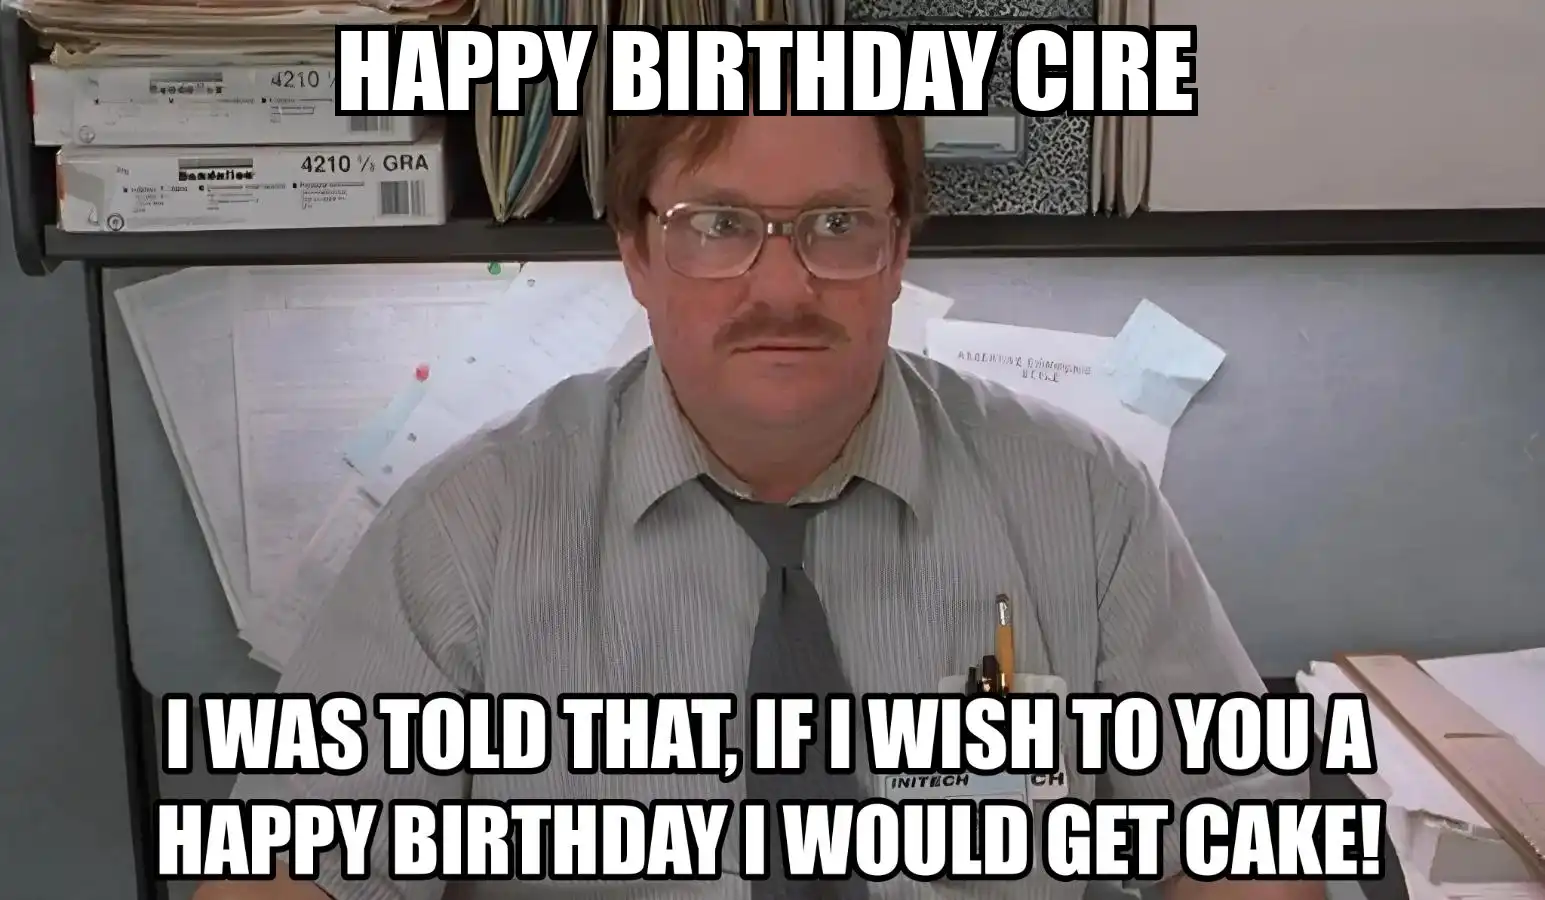 Happy Birthday Cire I Would Get A Cake Meme